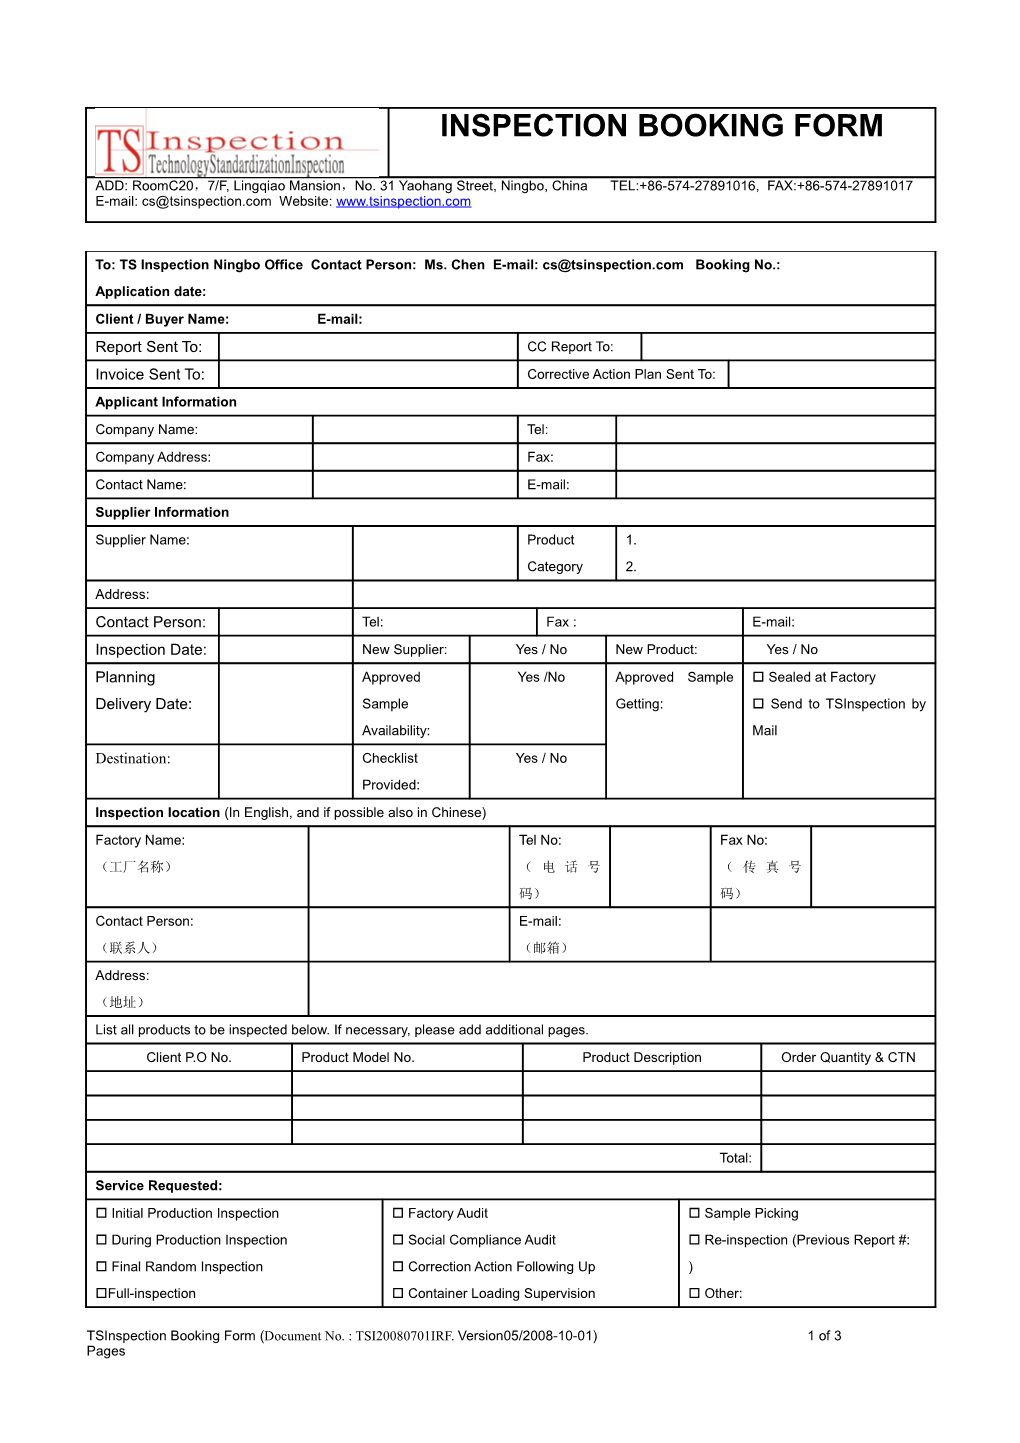 Inspection Booking Form-Ver05/2008-10-01